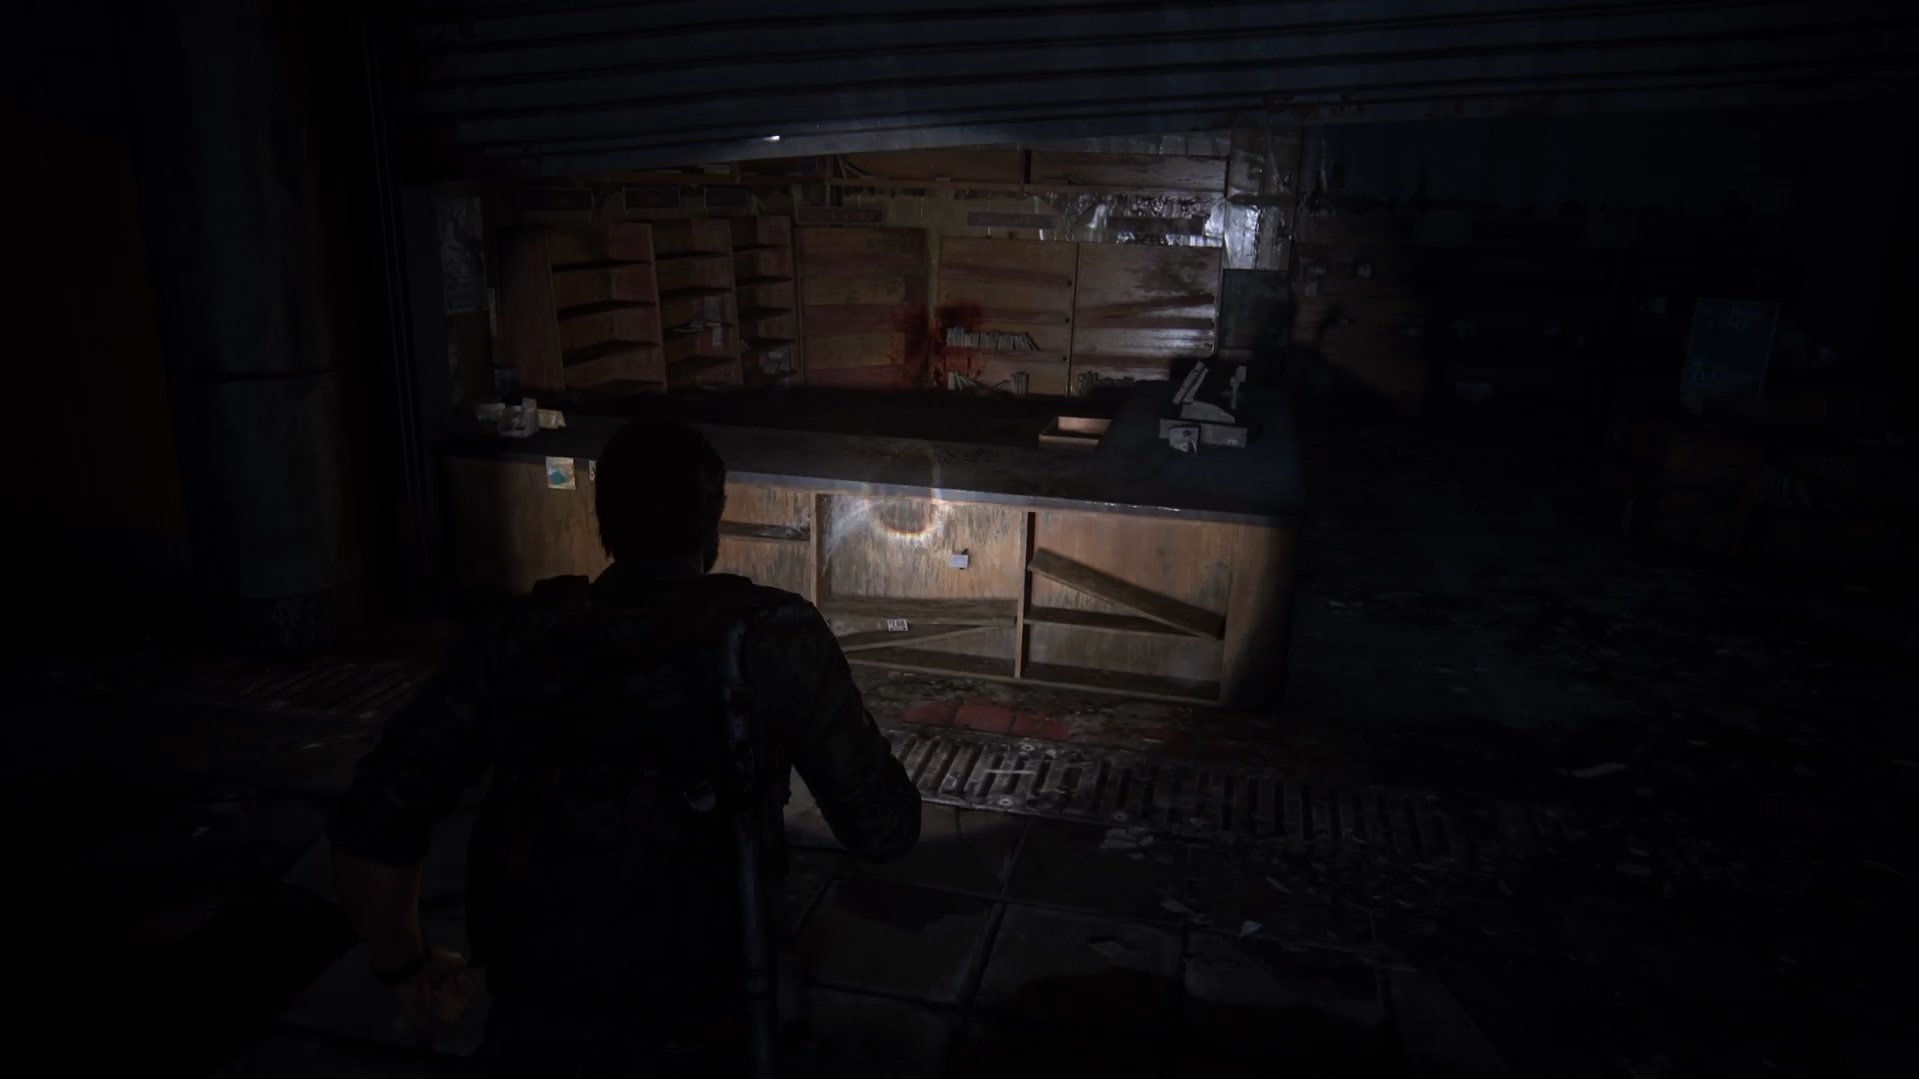 The Last of Us Part 1 all safe code combinations and locations